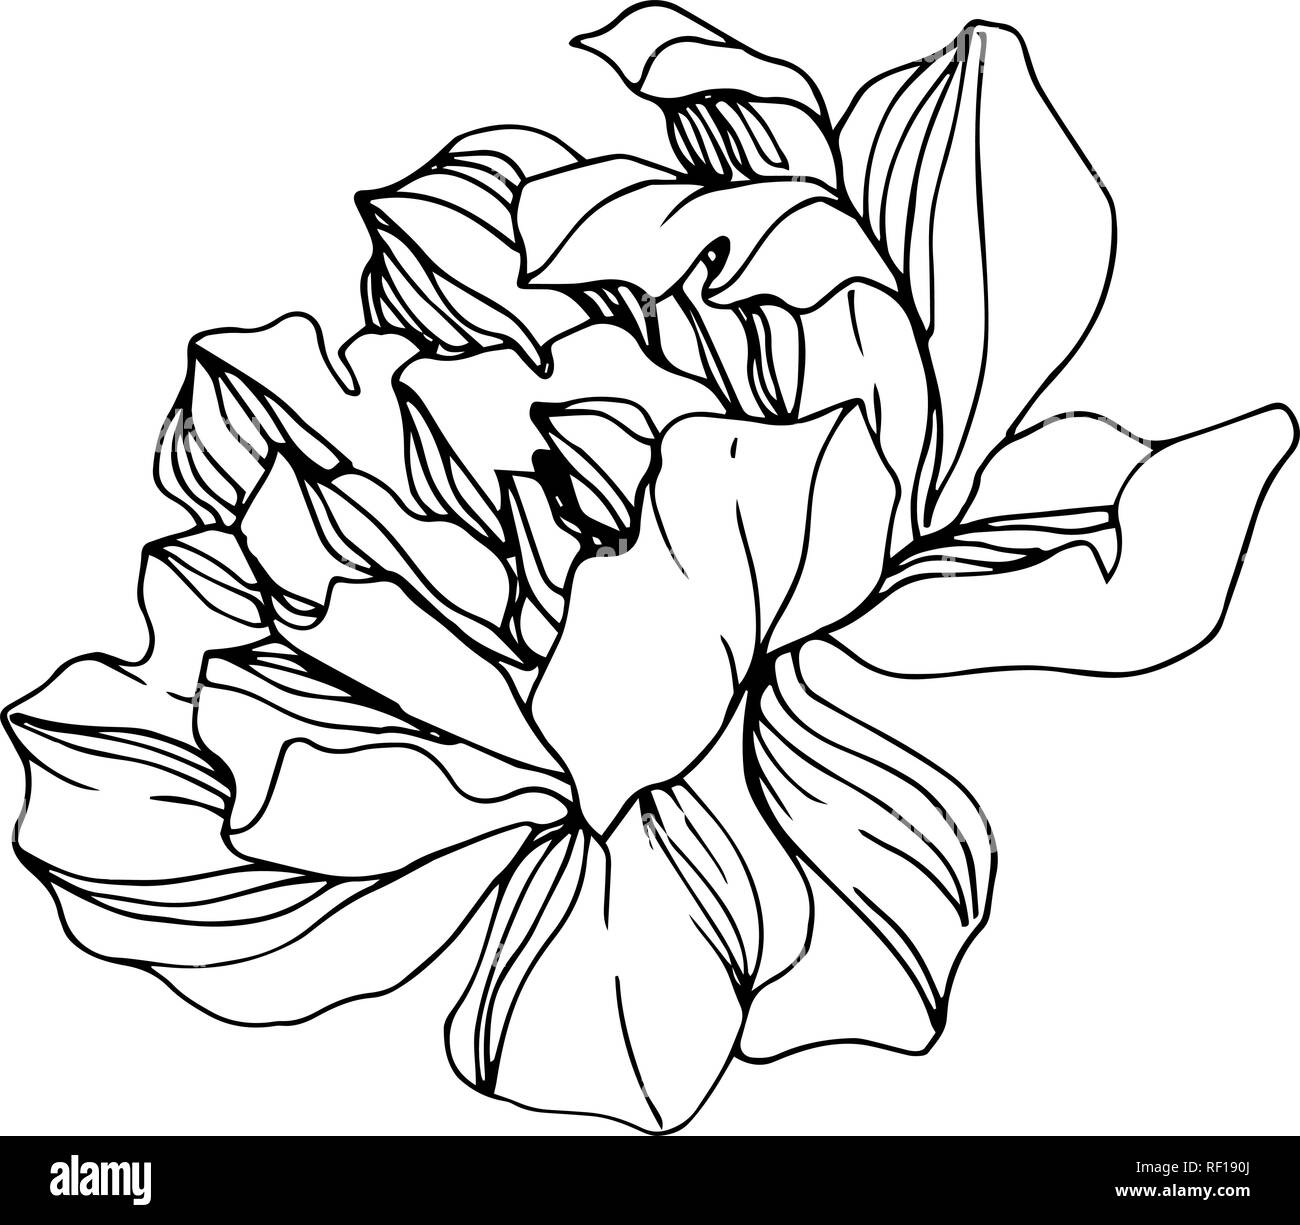 Vector Peony floral botanical flower. Wild spring leaf wildflower isolated. Black and white engraved ink art. Isolated peony illustration element. Stock Vector